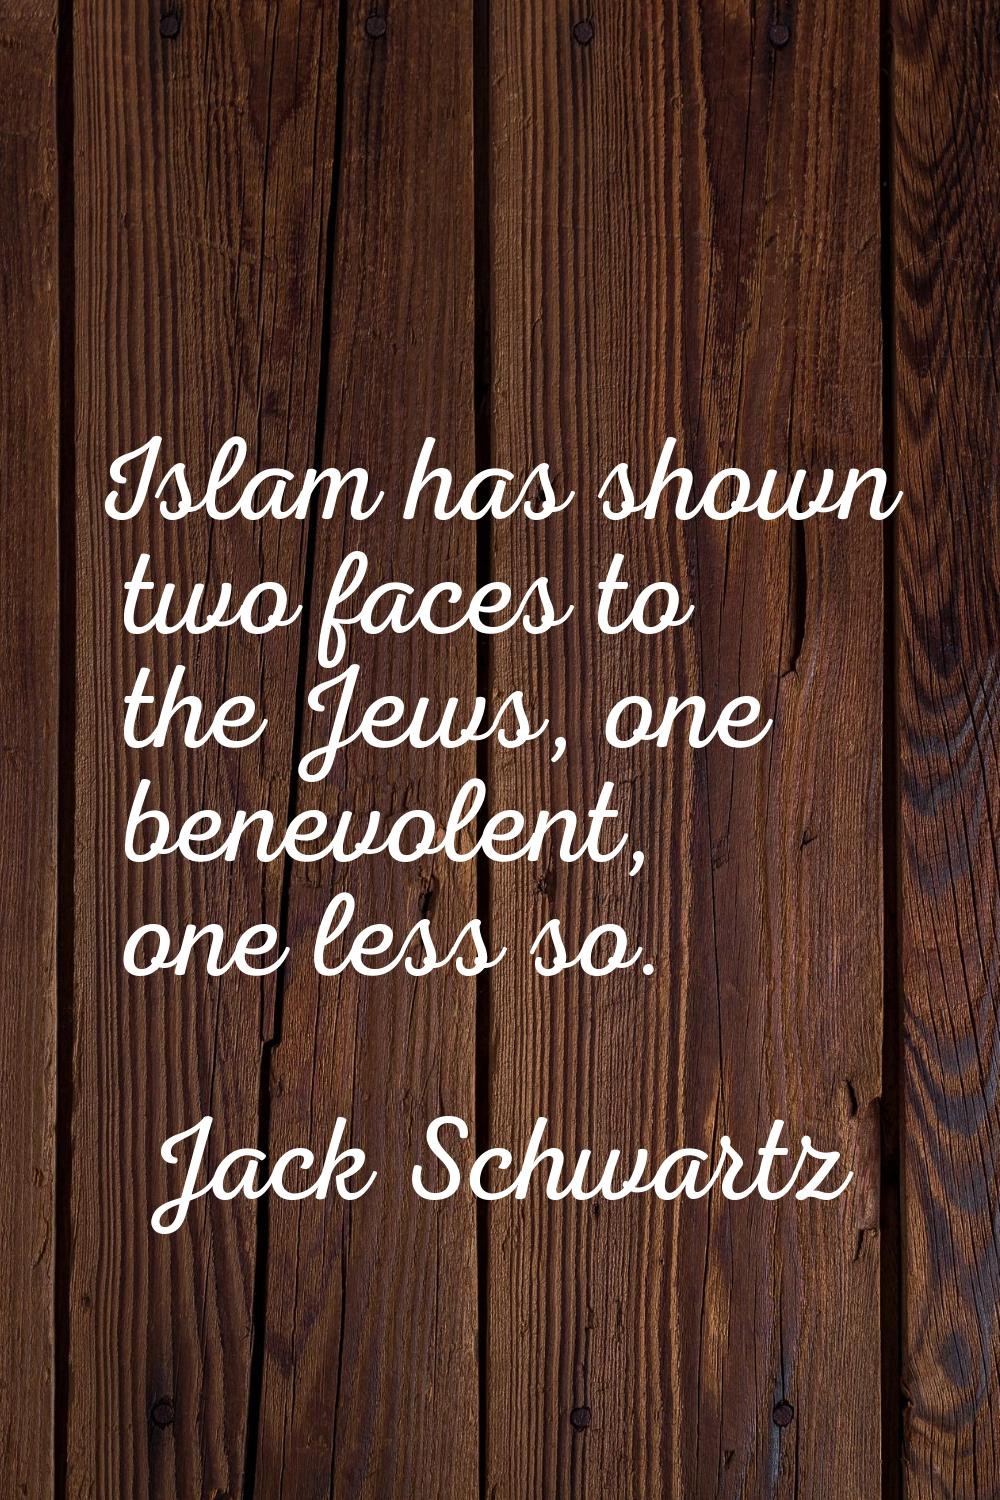 Islam has shown two faces to the Jews, one benevolent, one less so.